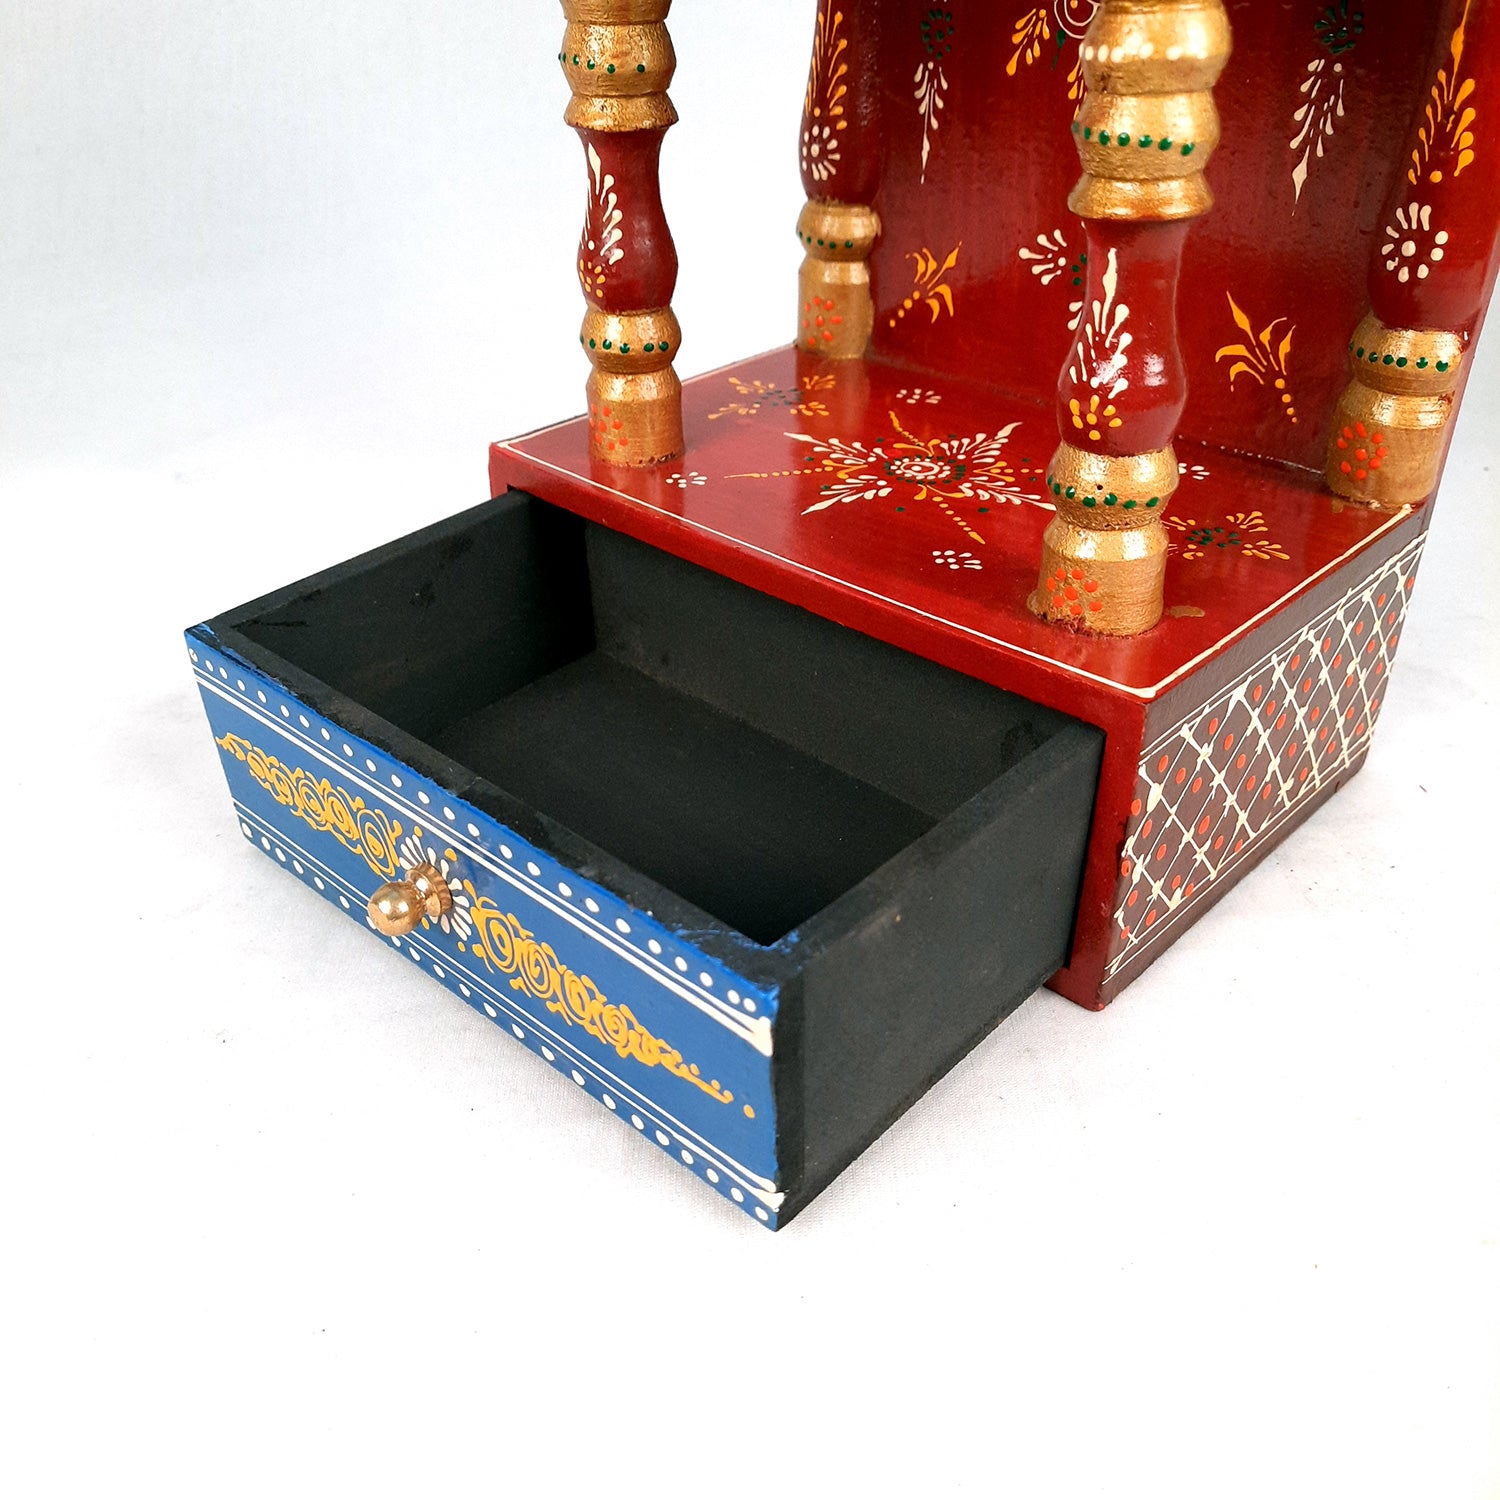 Pooja Mandir | Home Temple Wooden With Storage Drawer | Puja Stand / Mandap Wall Hanging – For Home, Ghar, Office, Shop - 14 inch - Apkamart